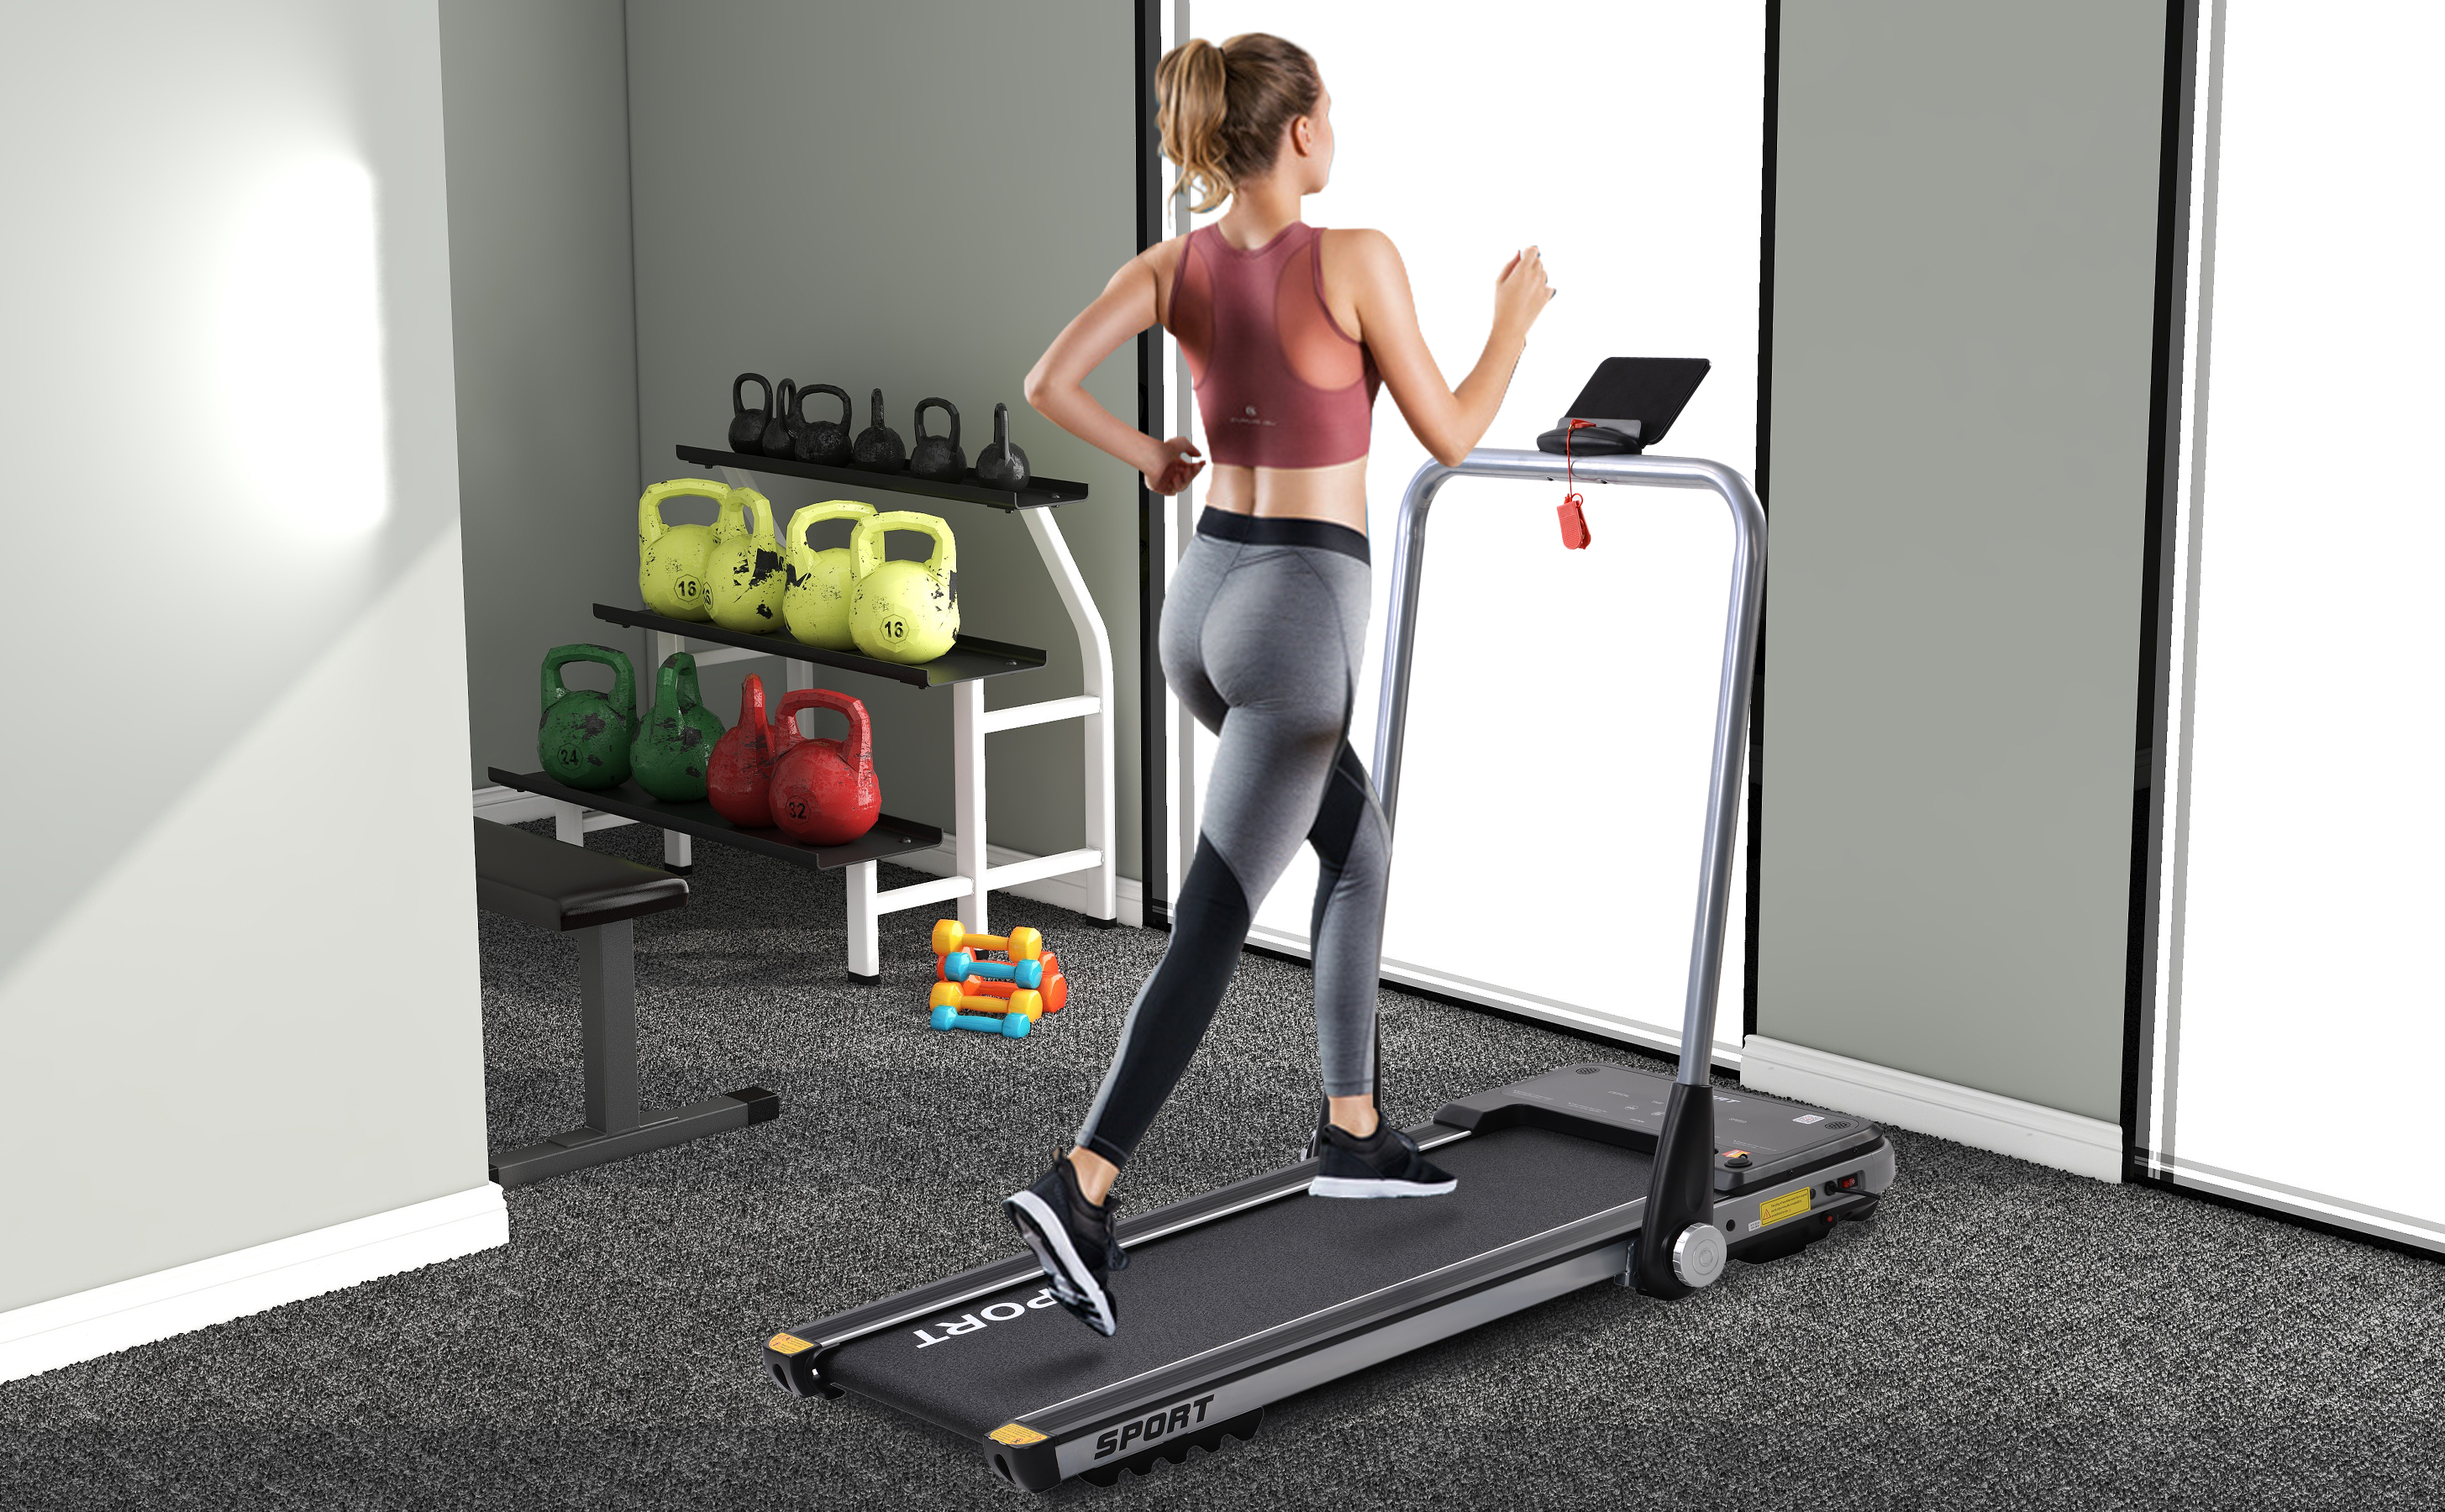 Treadmill for Home with Shock Reduction System, 2.5 HP Electric Folding Treadmill with Transportation wheels, 16" Wide Tread Belt, Connected with Mobile Phone - Newegg.com